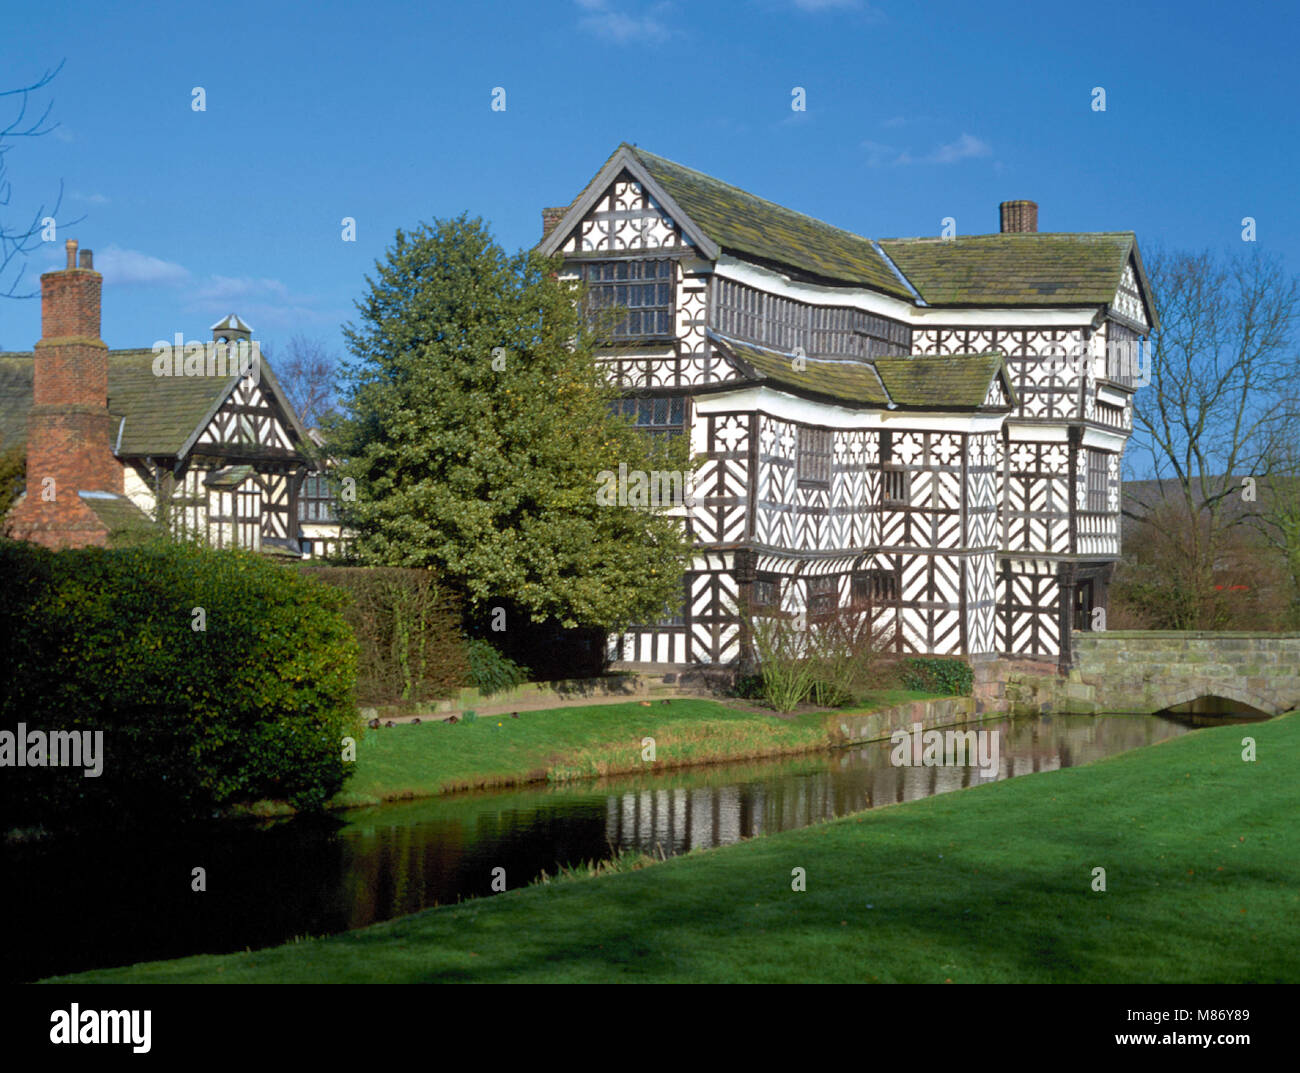 Little Moreton Hall, a 15th century timber framed moated manor house near Congleton, Cheshire Stock Photo